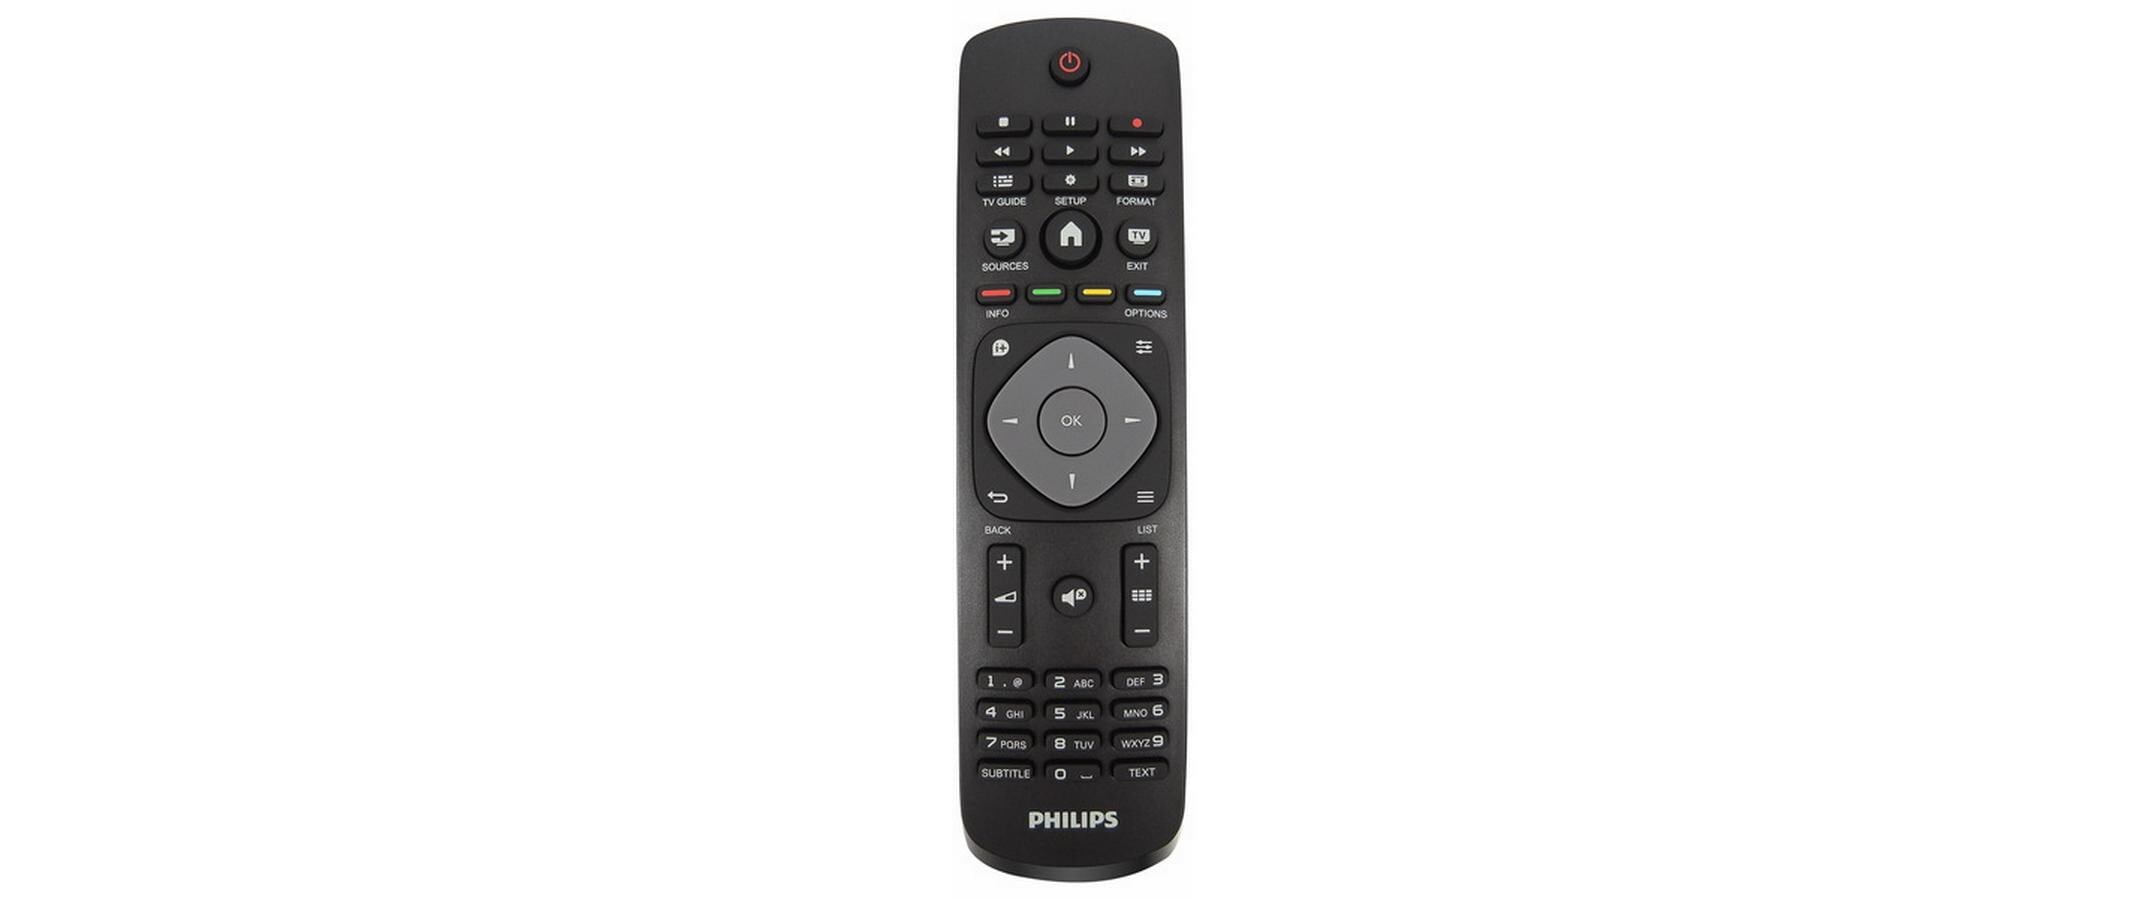 Philips LCD-LED Fernseher »24PHS5507/12, 24 LED-«, 60 cm/24 Zoll, WXGA  Trouver sur